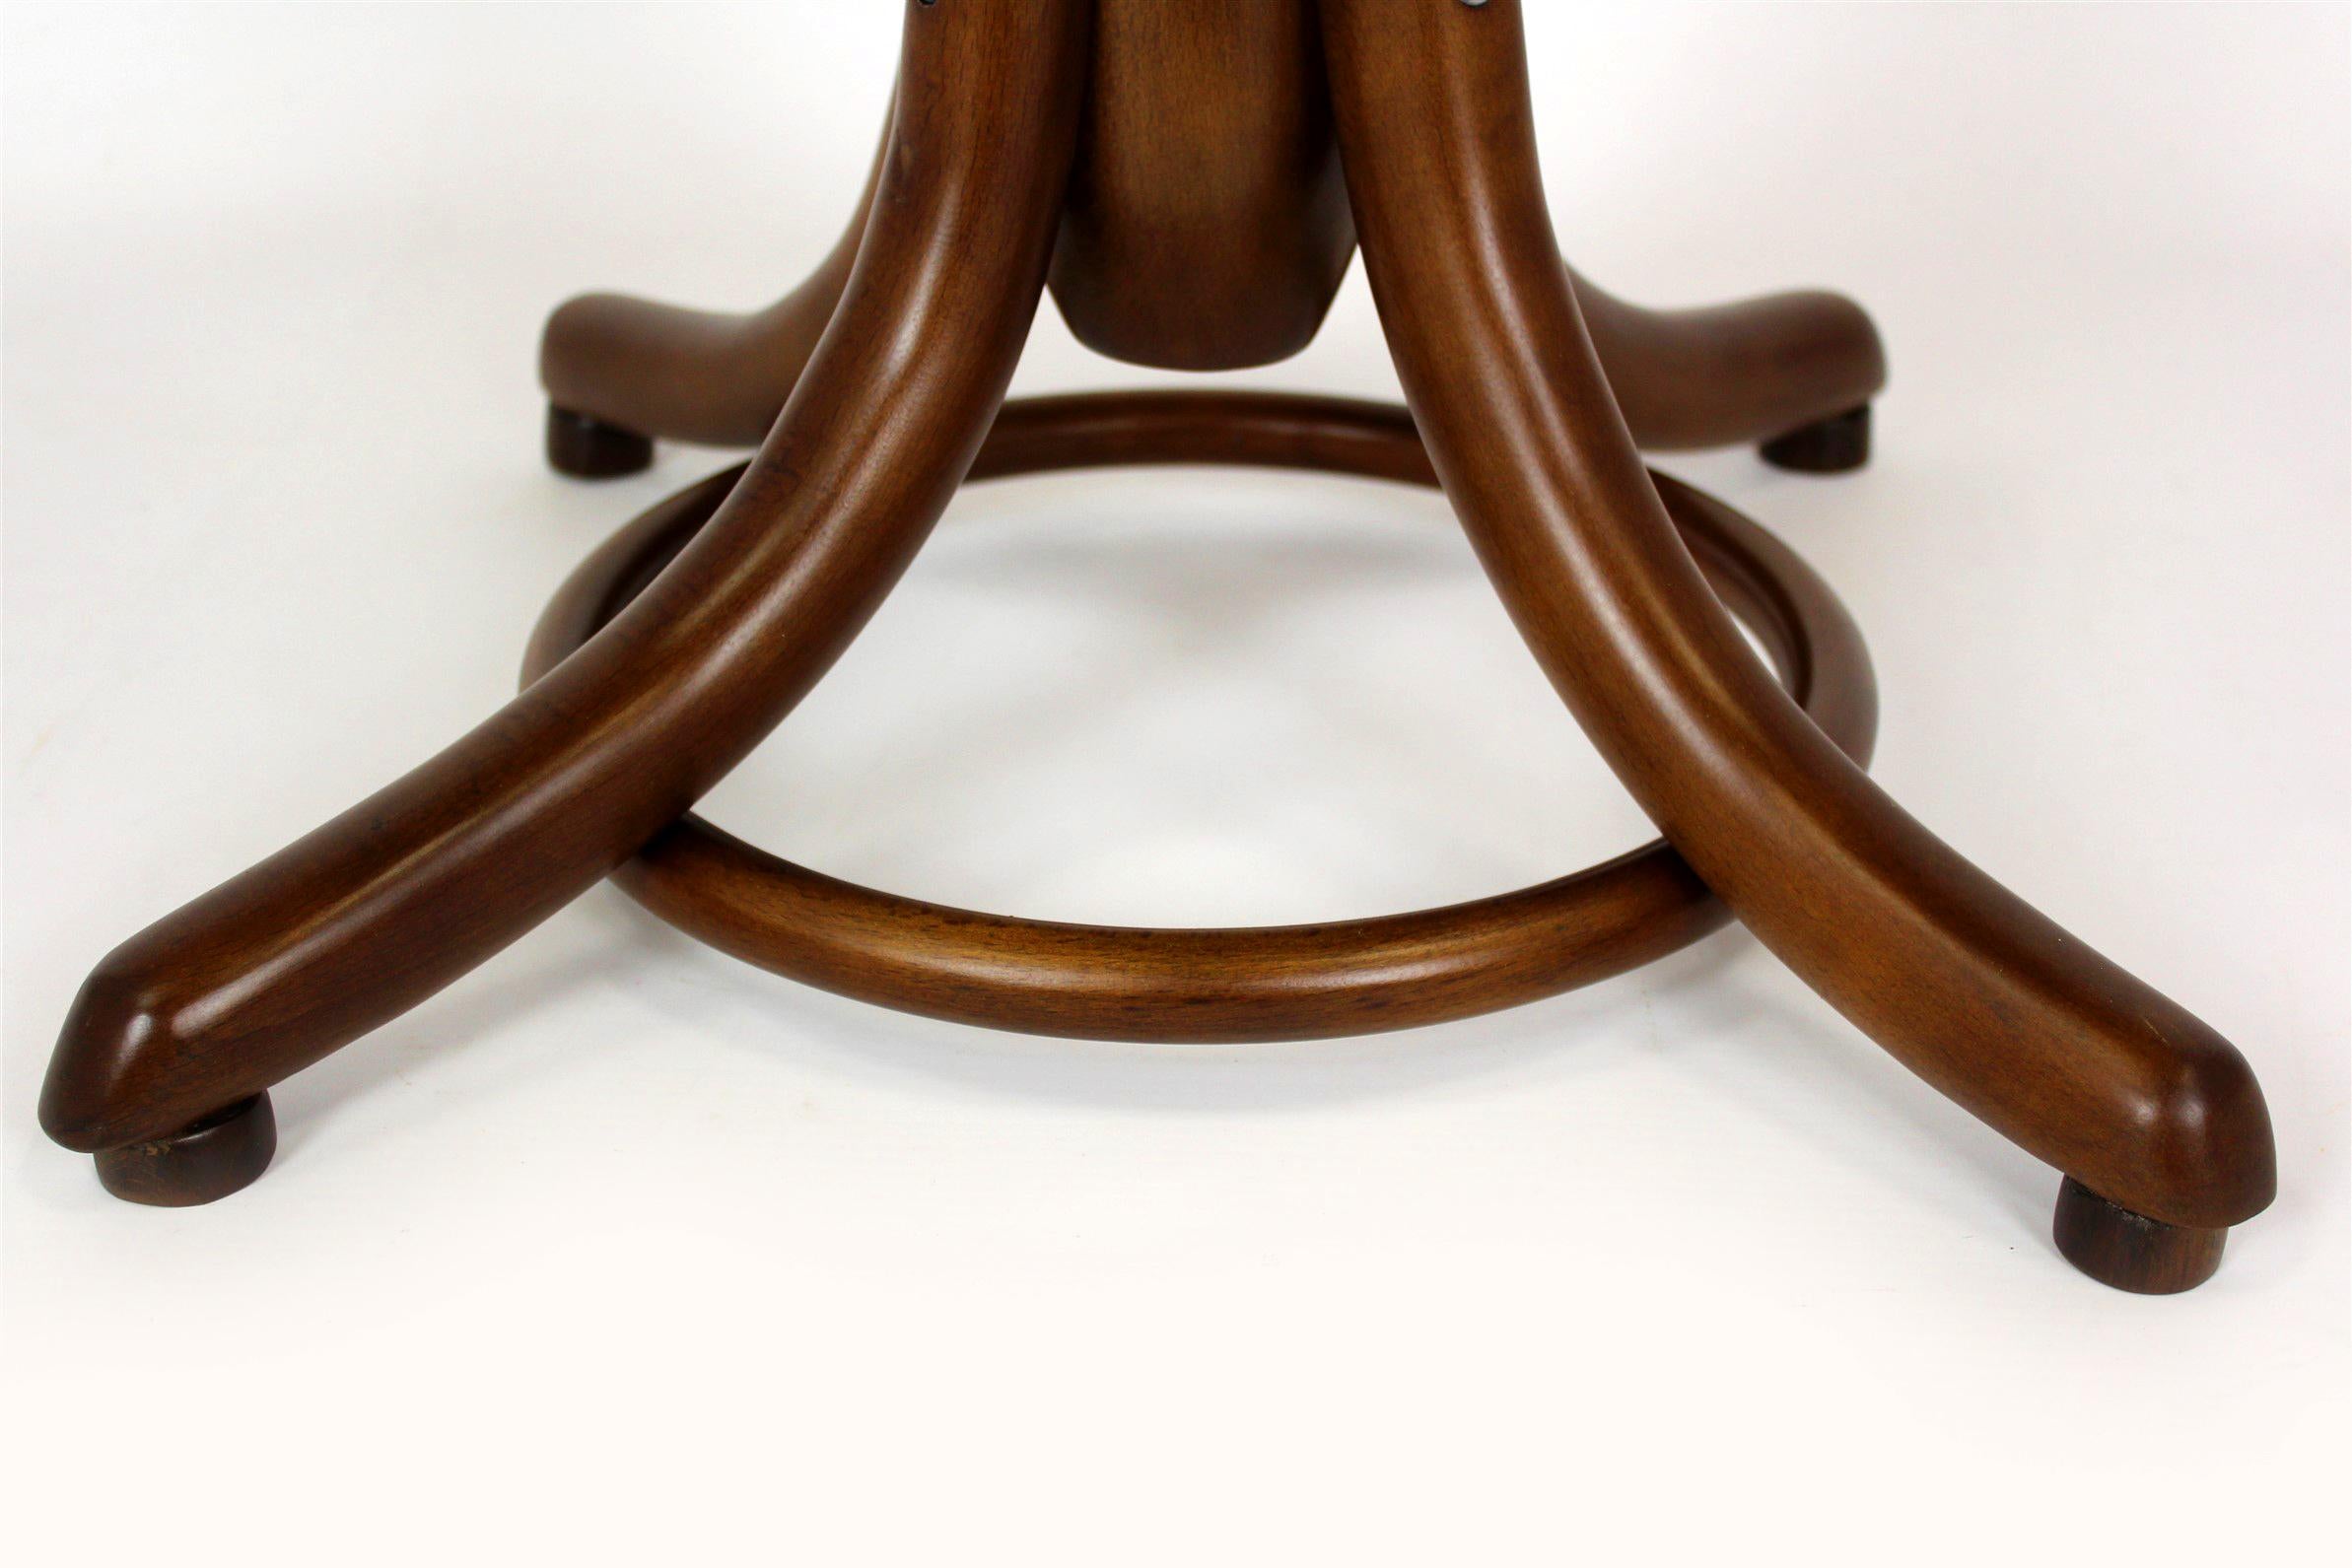 Restored Thonet Style Bentwood Piano Stool, 1940s For Sale 5